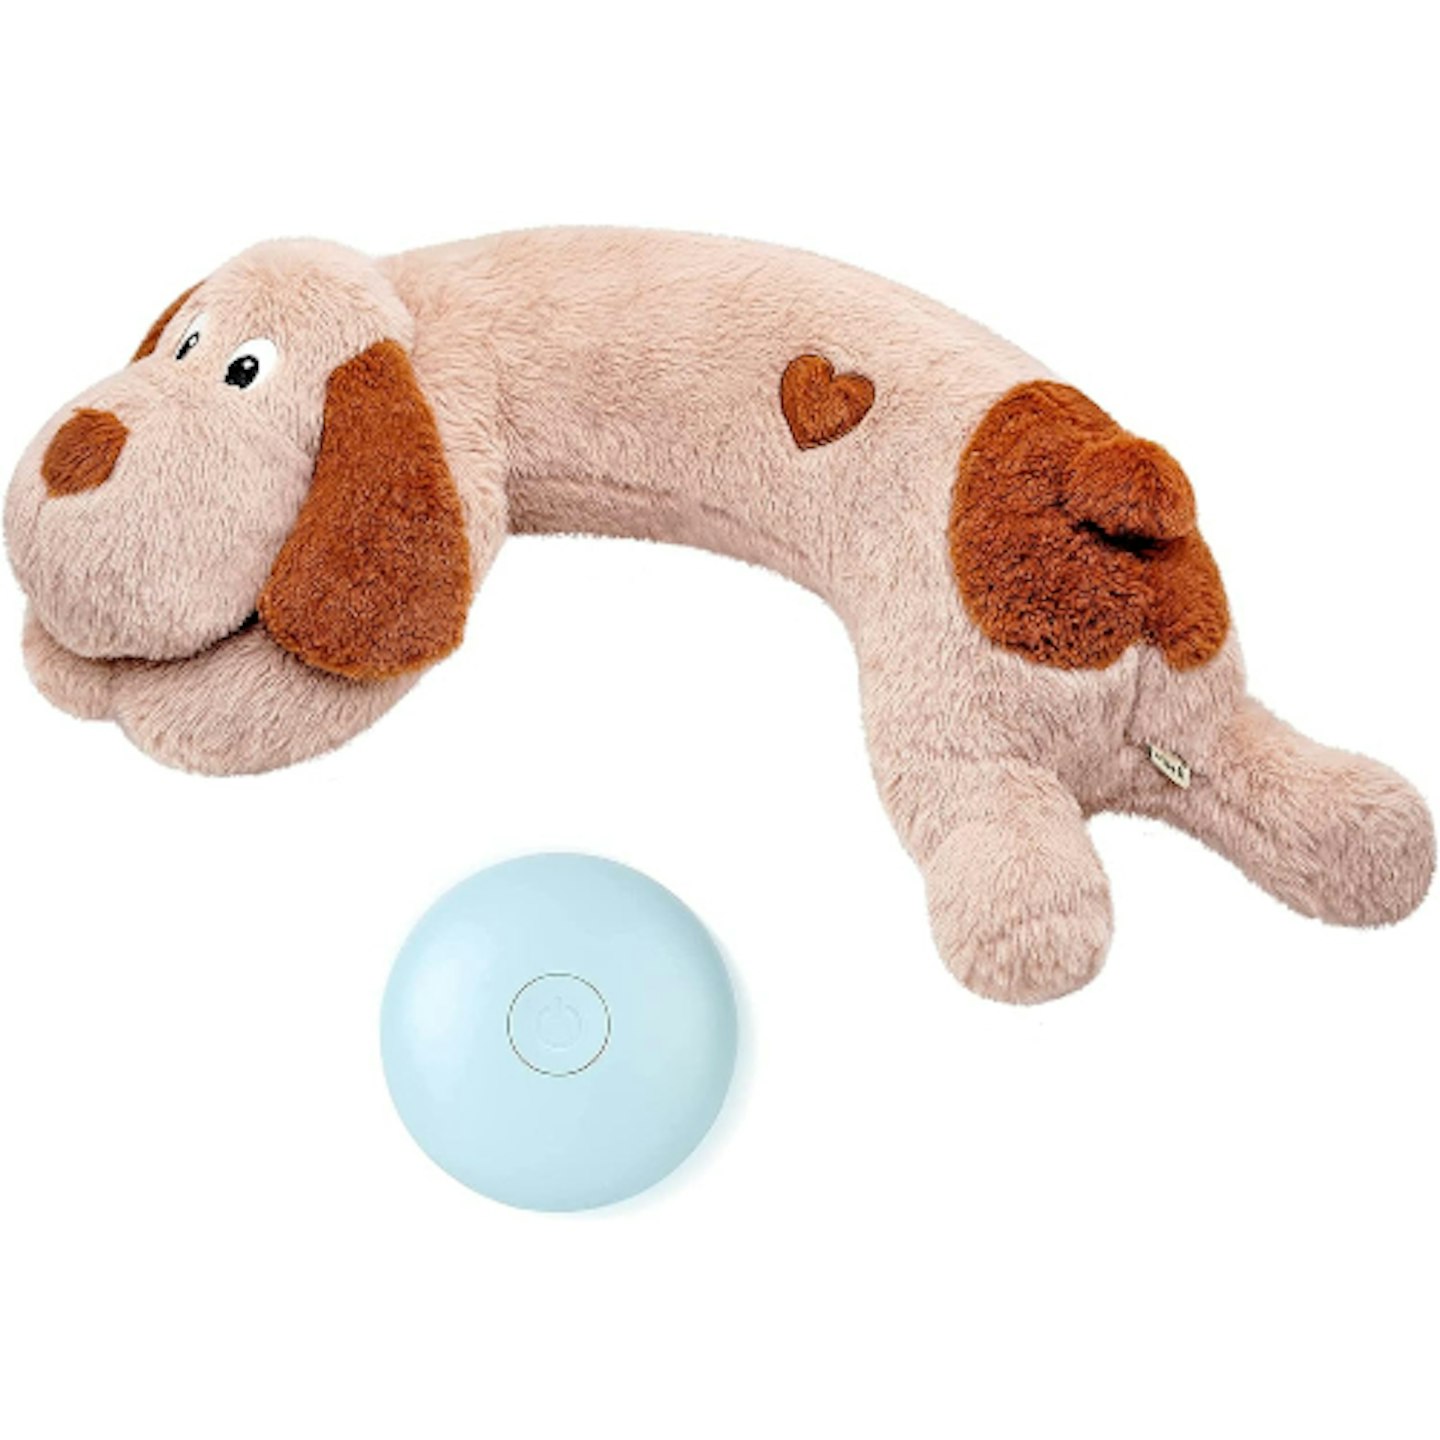 Woek large heartbeat toy